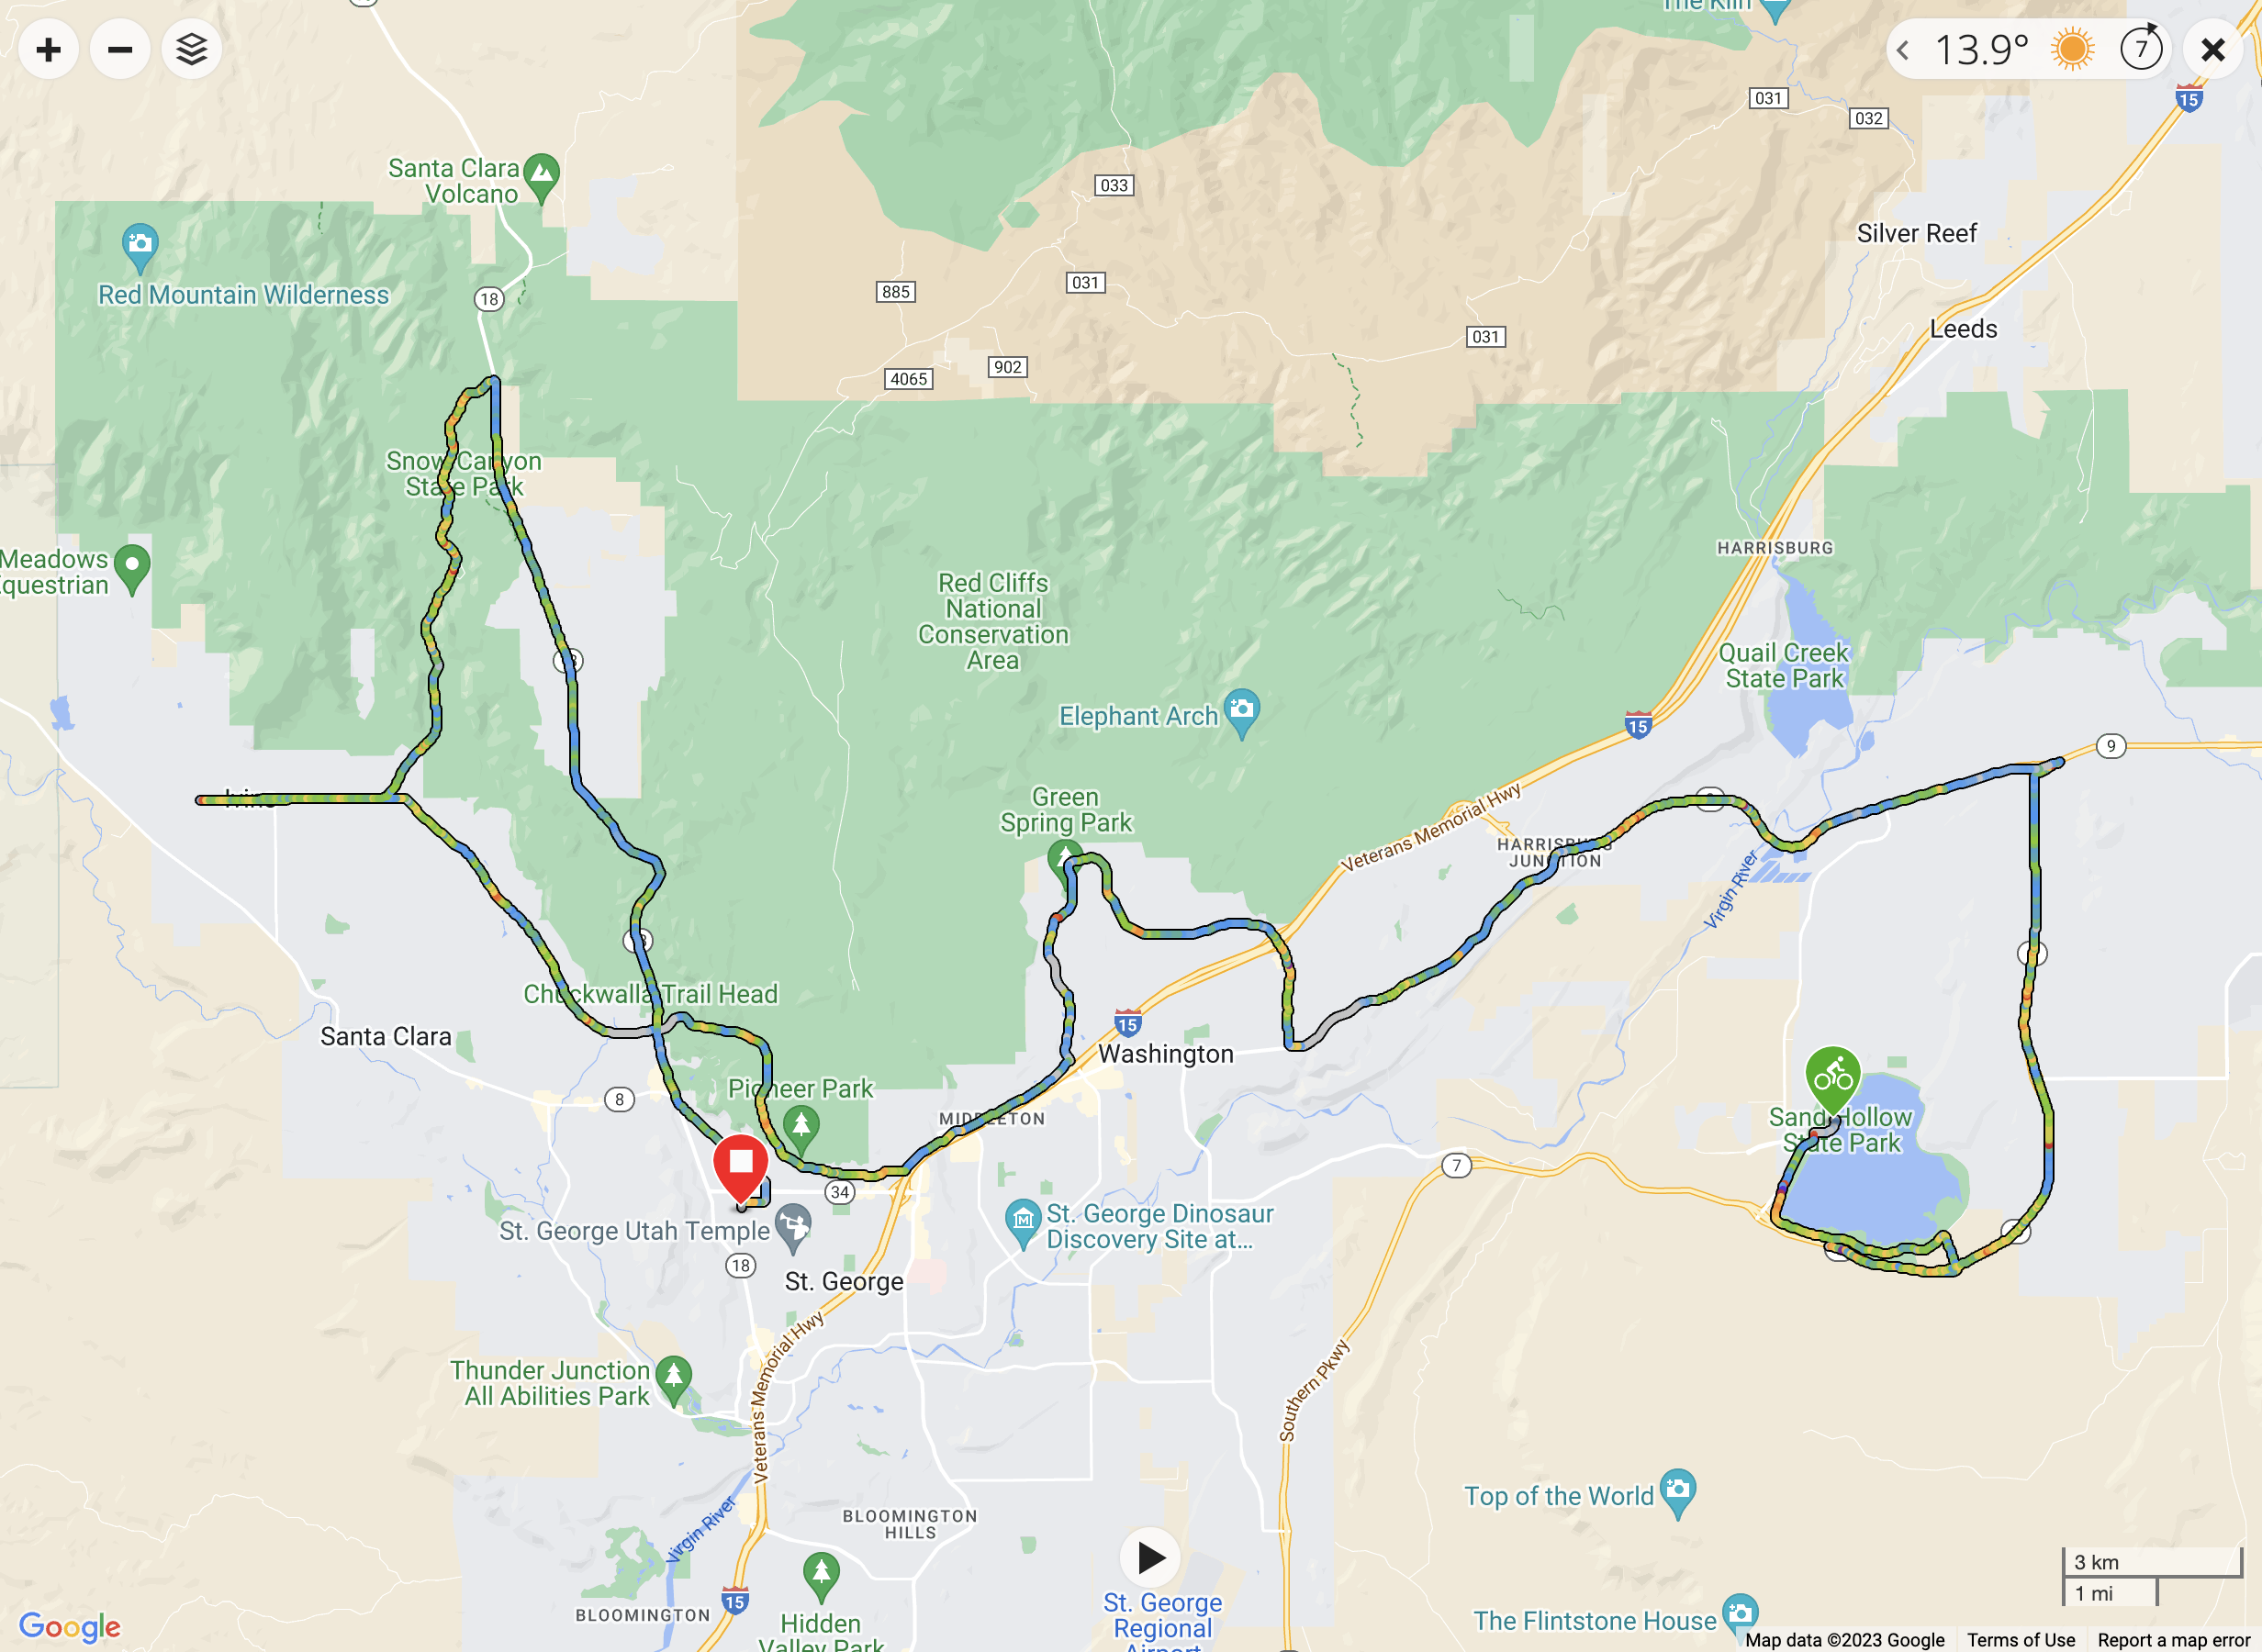 A screenshot of a Garmin Connect map showing the route for the bike leg of Ironman 70.3 St. George.